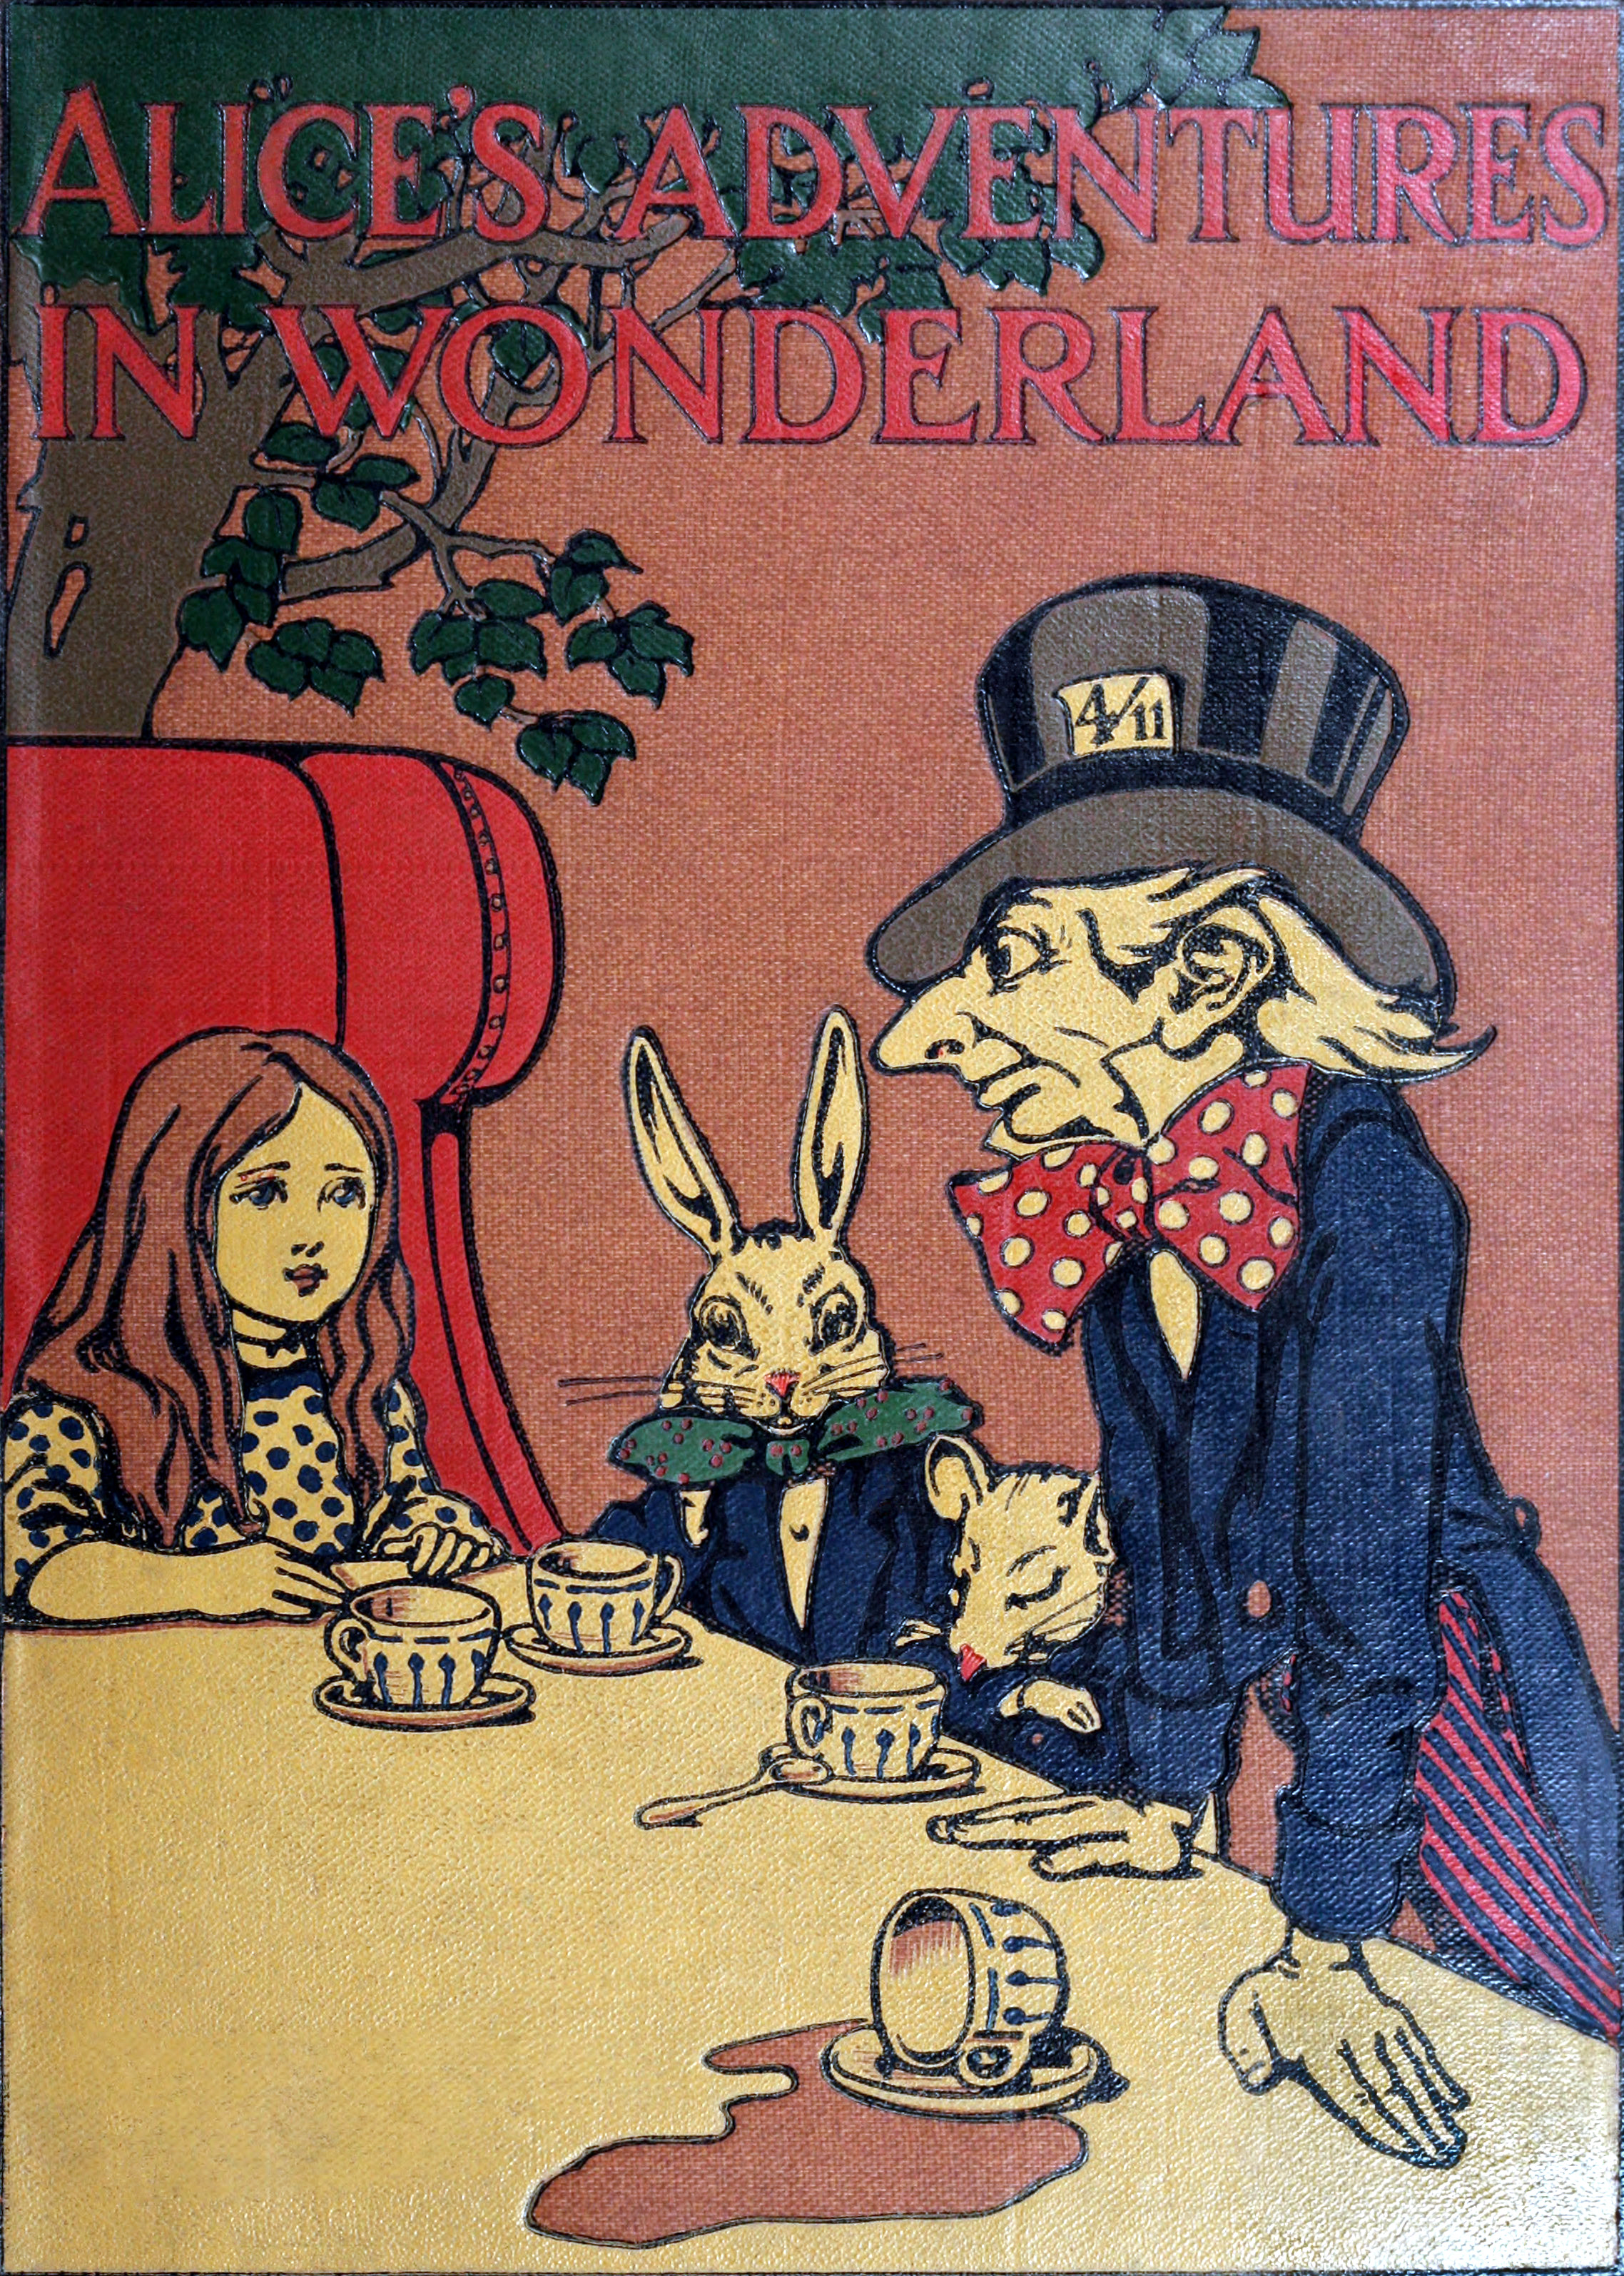 https://upload.wikimedia.org/wikipedia/commons/a/a8/Alice%27s_Adventures_in_Wonderland_-_Carroll%2C_Robinson_-_S001_-_Cover.jpg